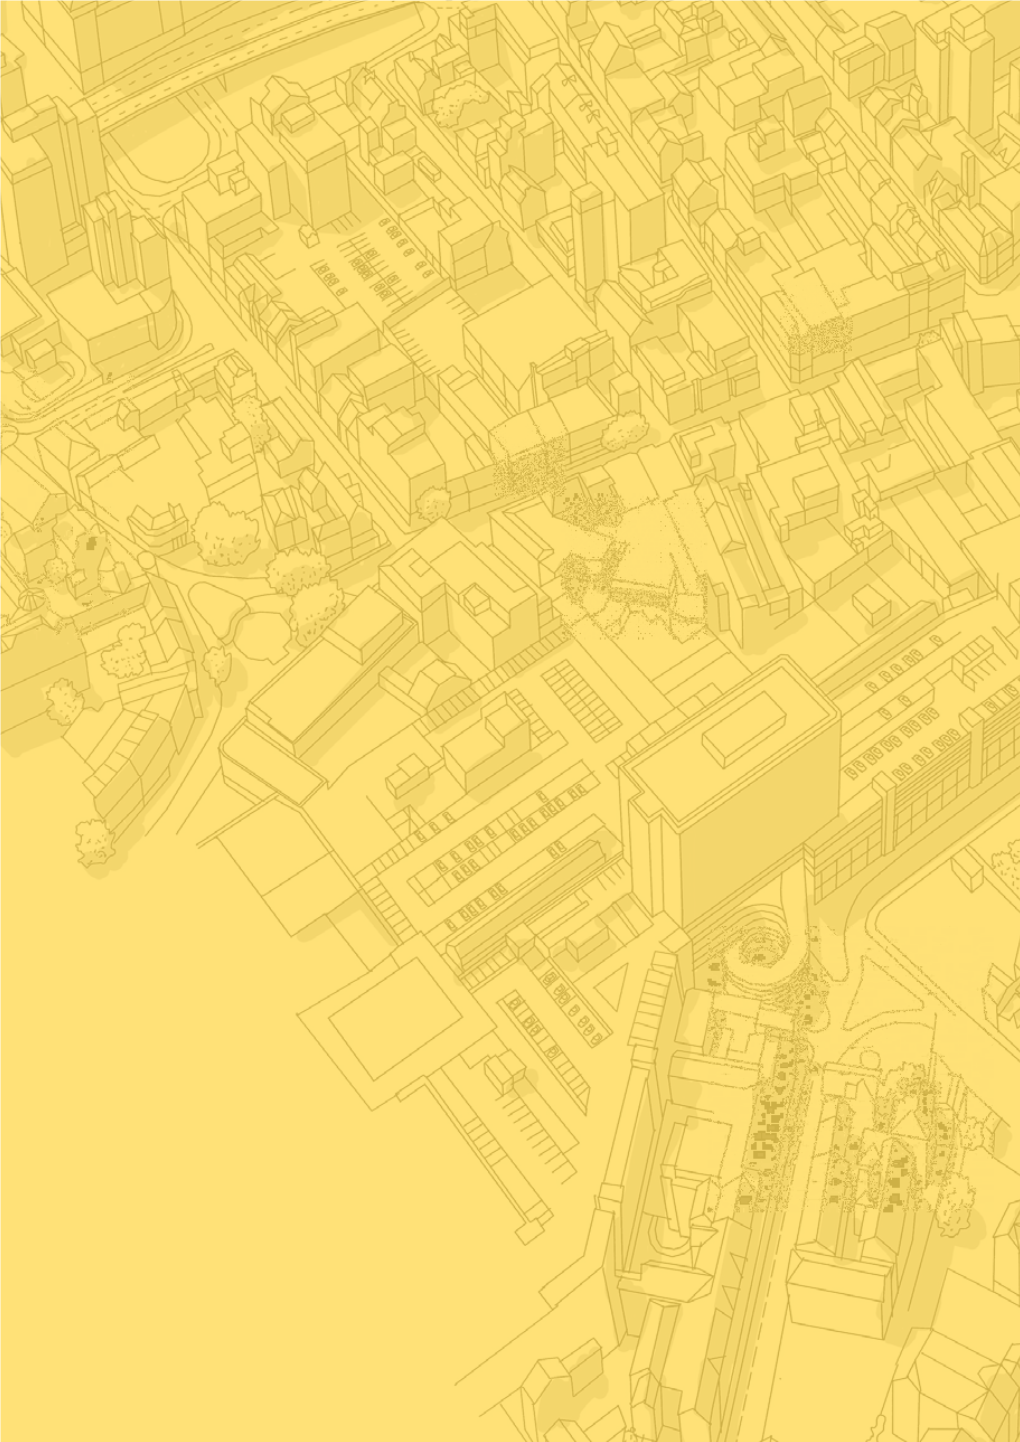 Town Centre Masterplan Stage 1: Baseline Analysis Report